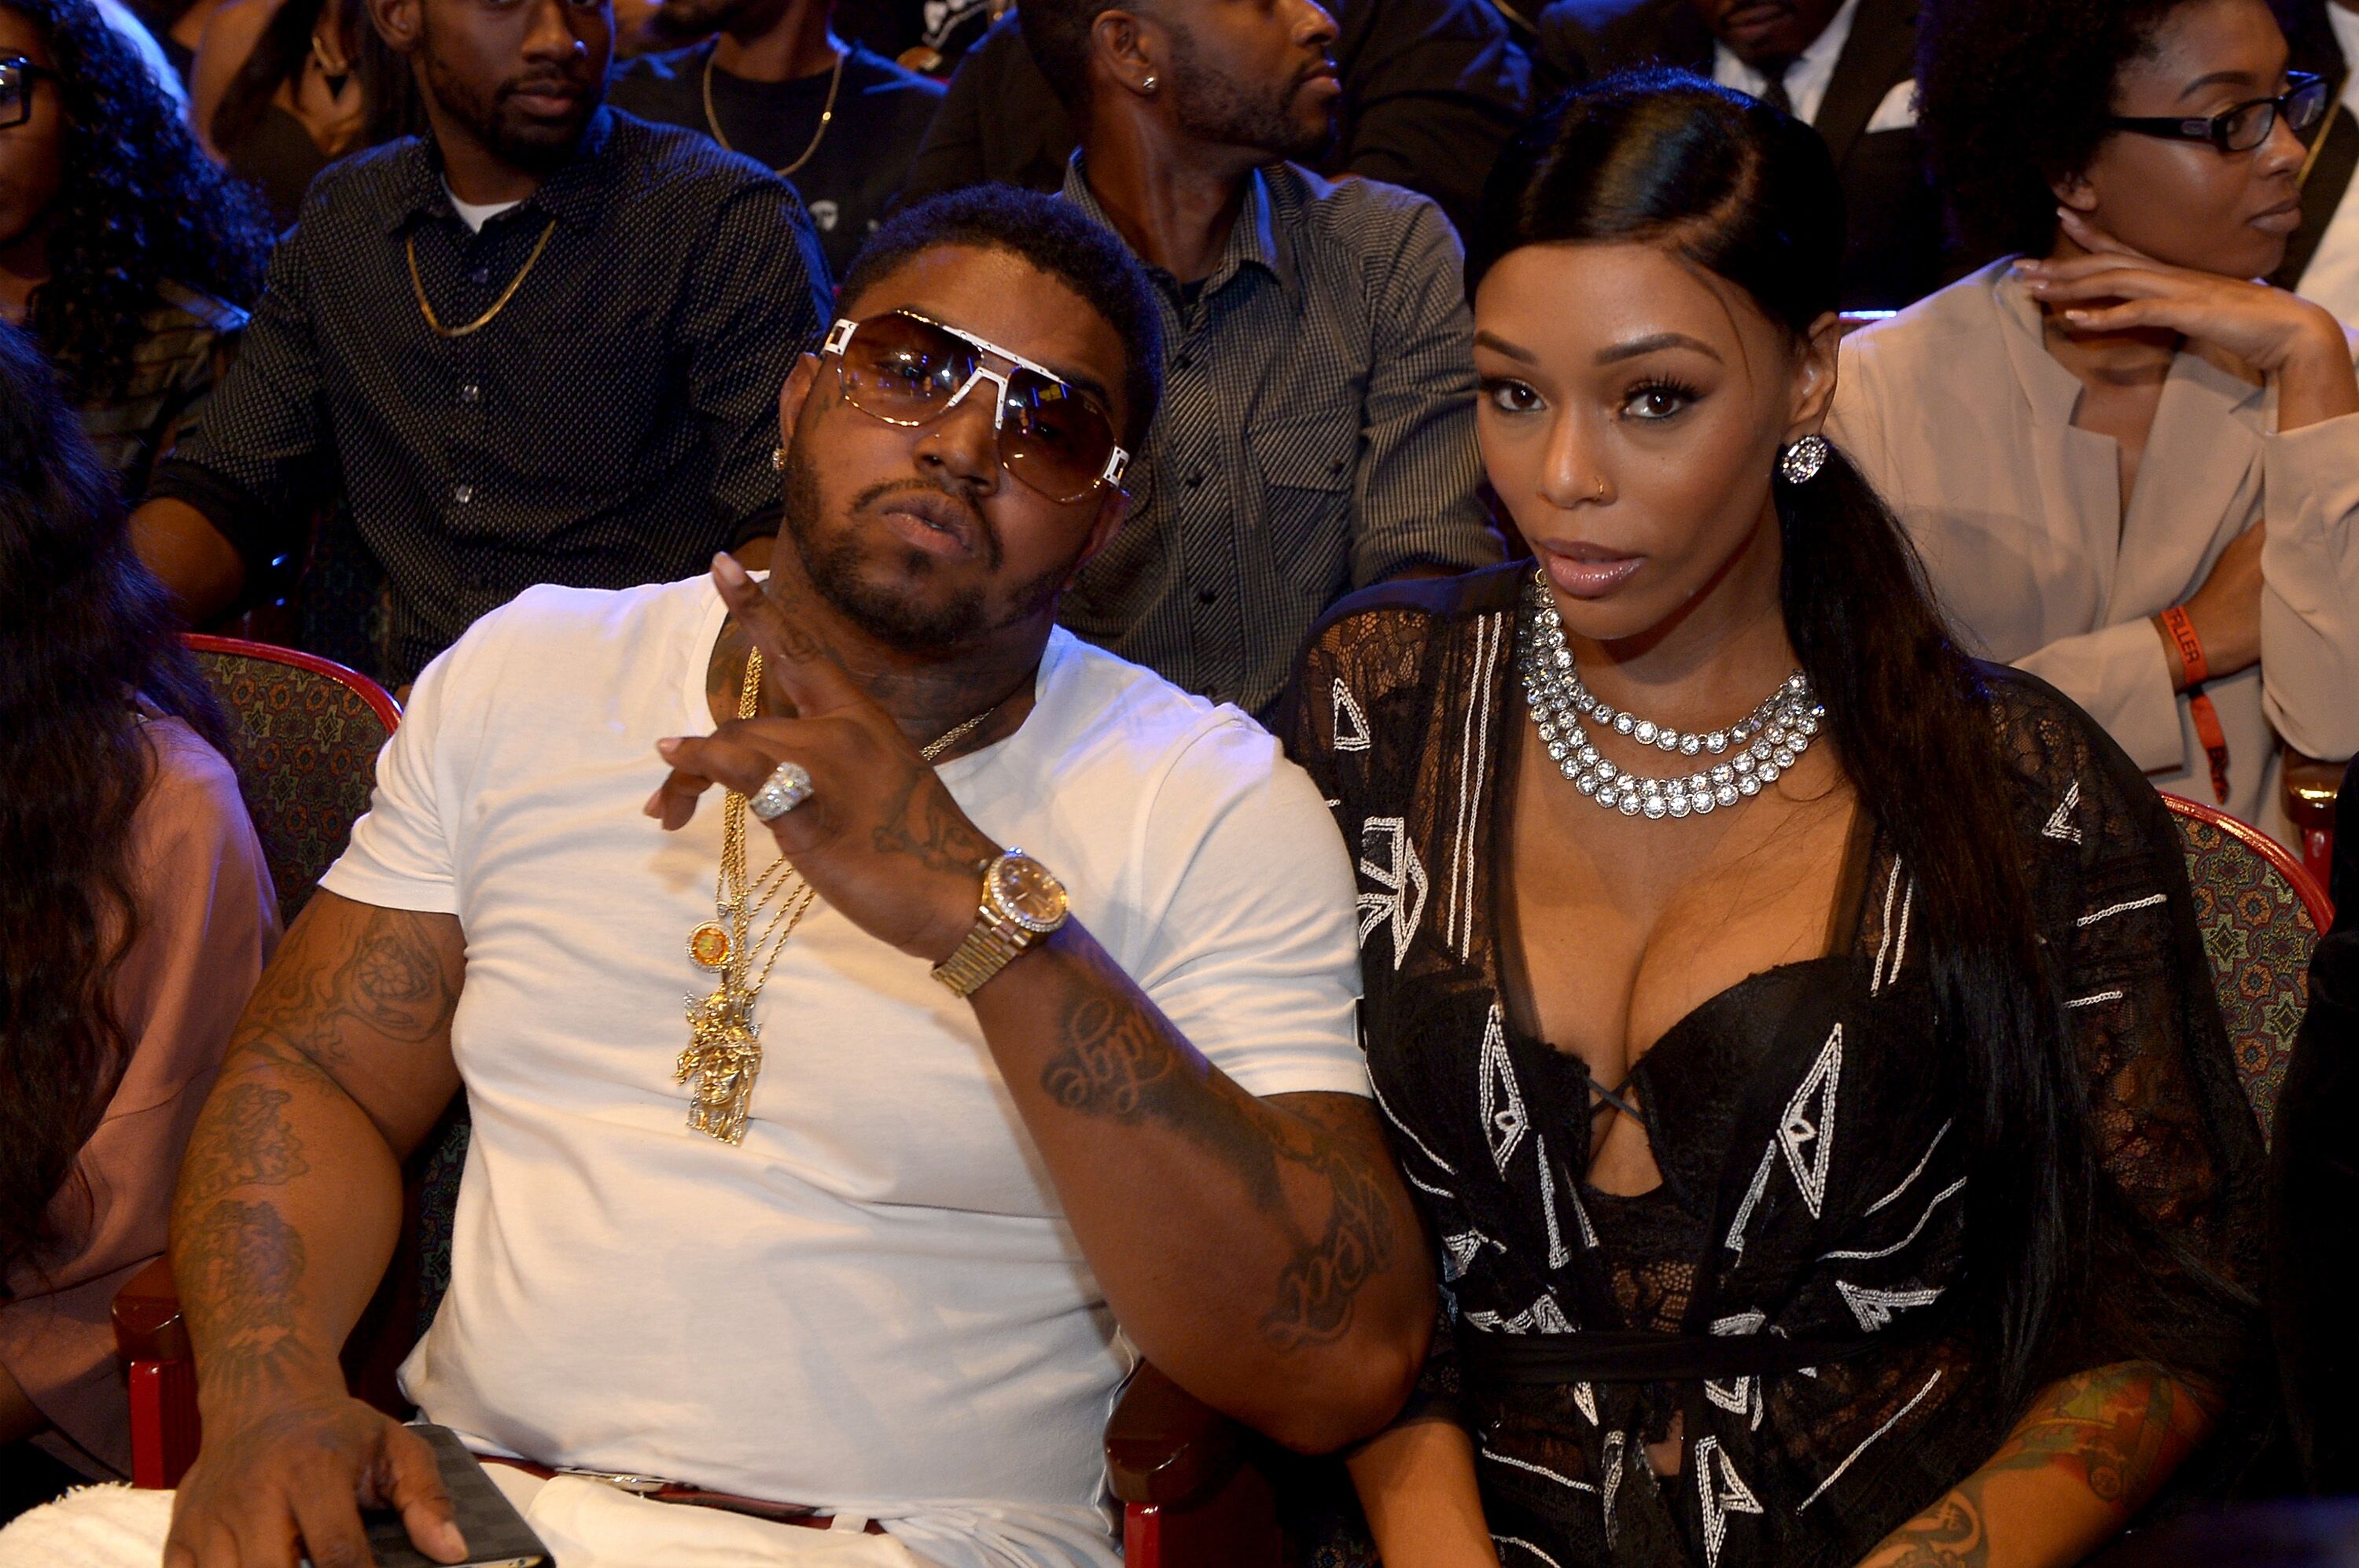 Rapper Lil Scrappy and his wife Bambi/ Source: Getty Images